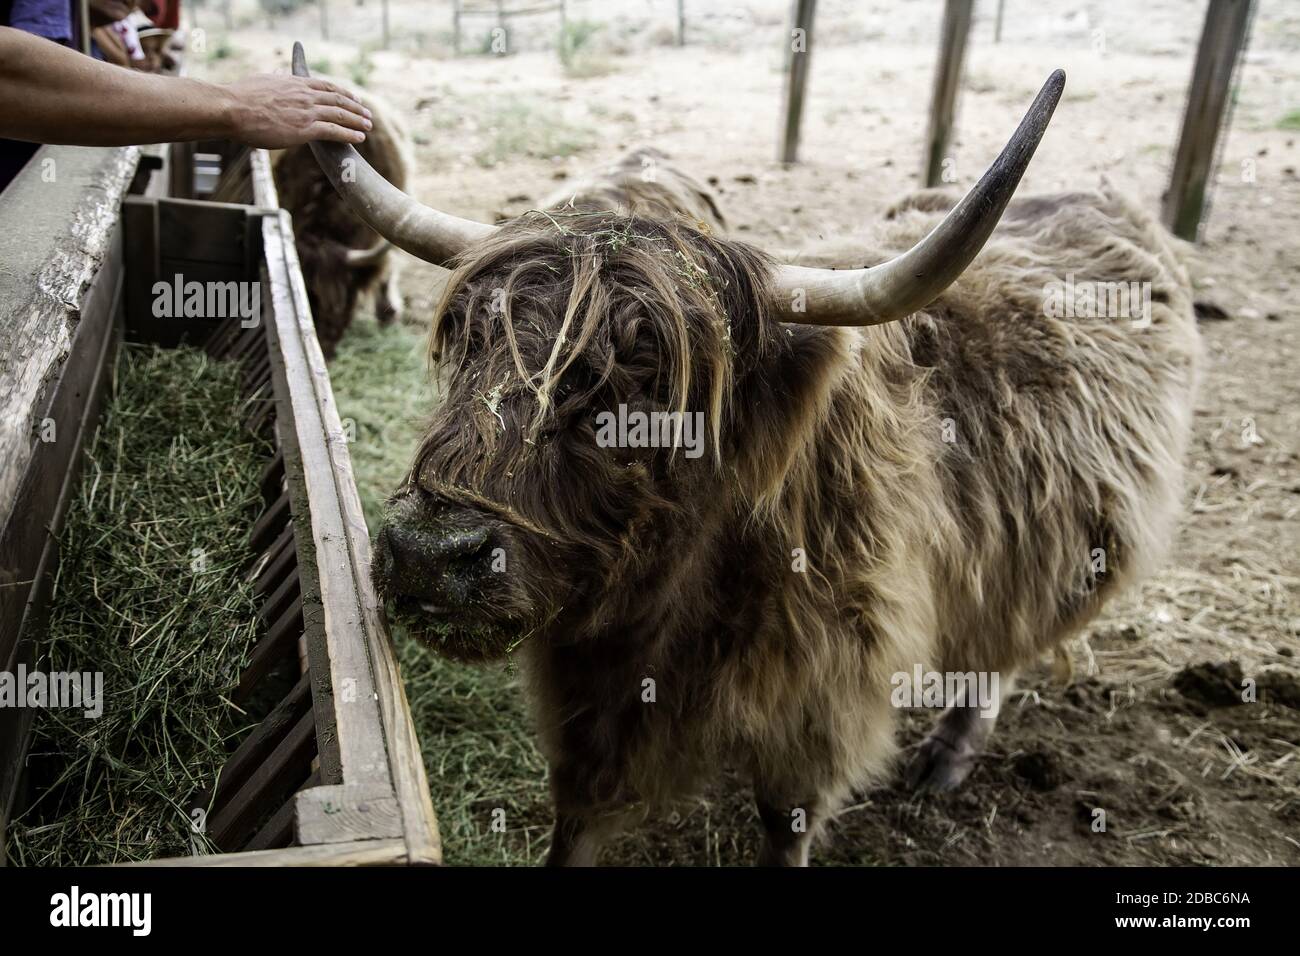 Wild ox, detail of large horned animal, mammal Stock Photo - Alamy